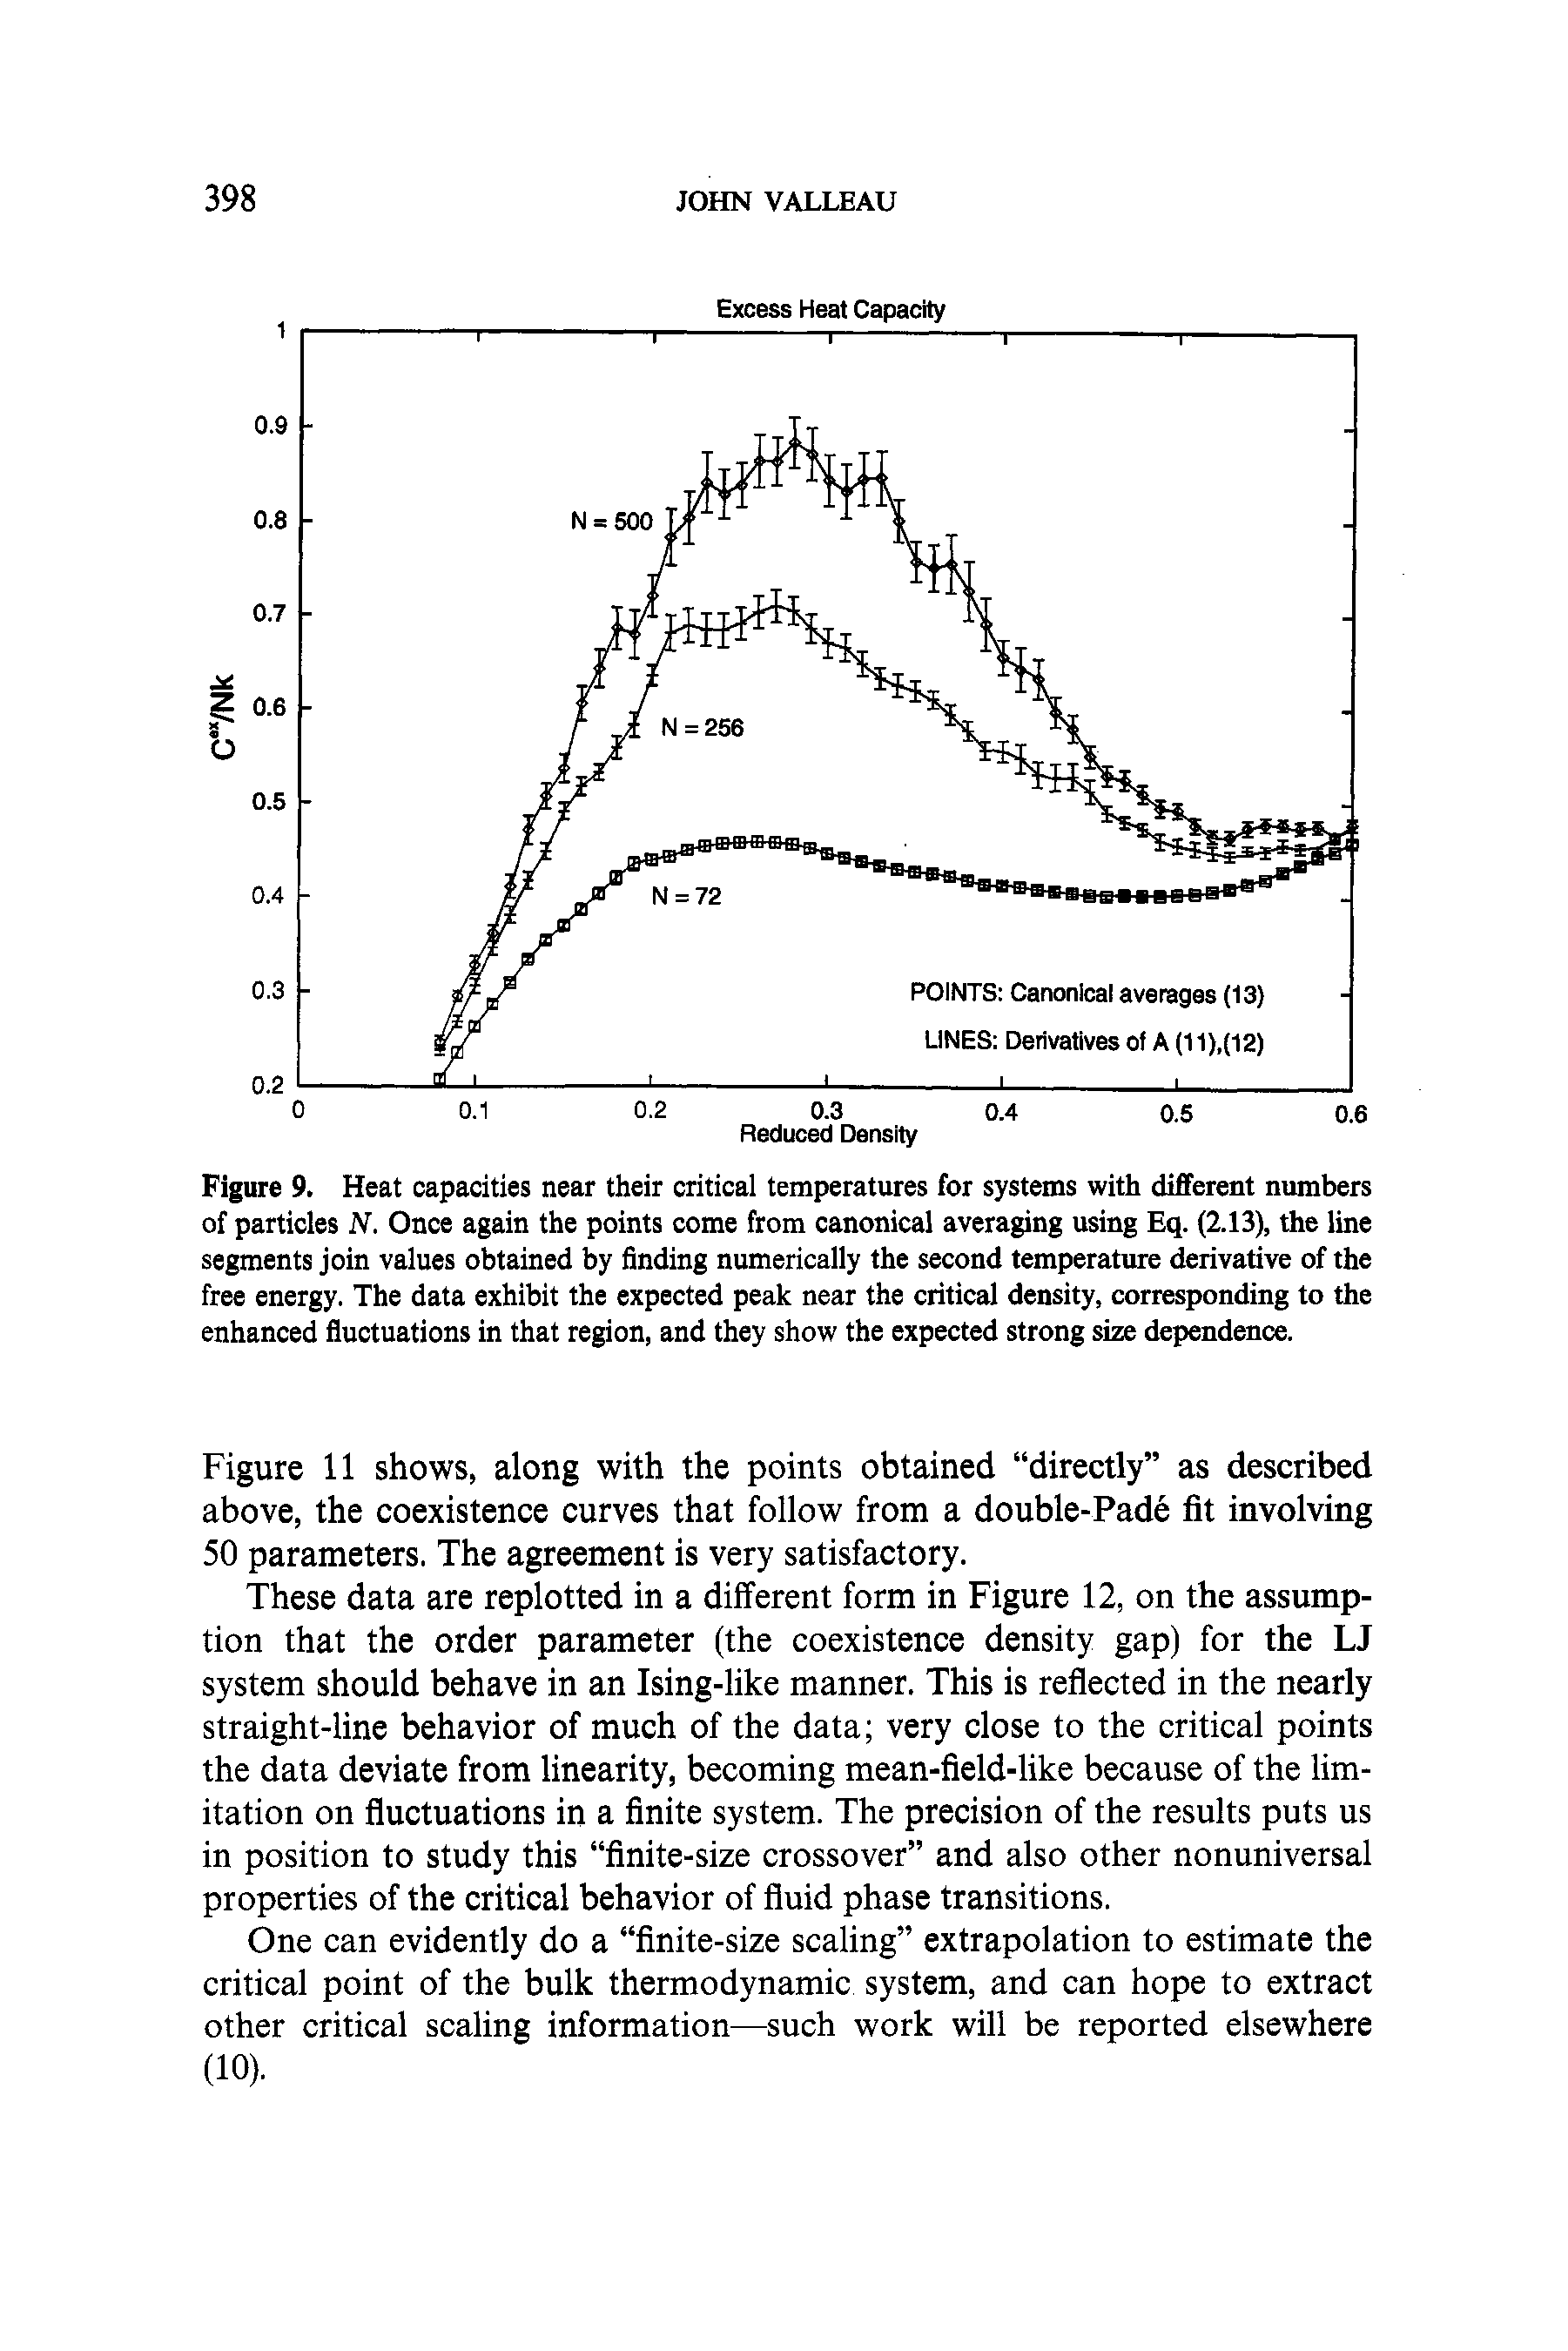 Figure 9. Heat capacities near their critical temperatures for systems with different numbers of particles N. Once again the points come from canonical averaging using Eq. (2.13), the line segments join values obtained by finding numerically the second temperature derivative of the free energy. The data exhibit the expected peak near the critical density, corresponding to the enhanced fluctuations in that region, and they show the expected strong size dependence.